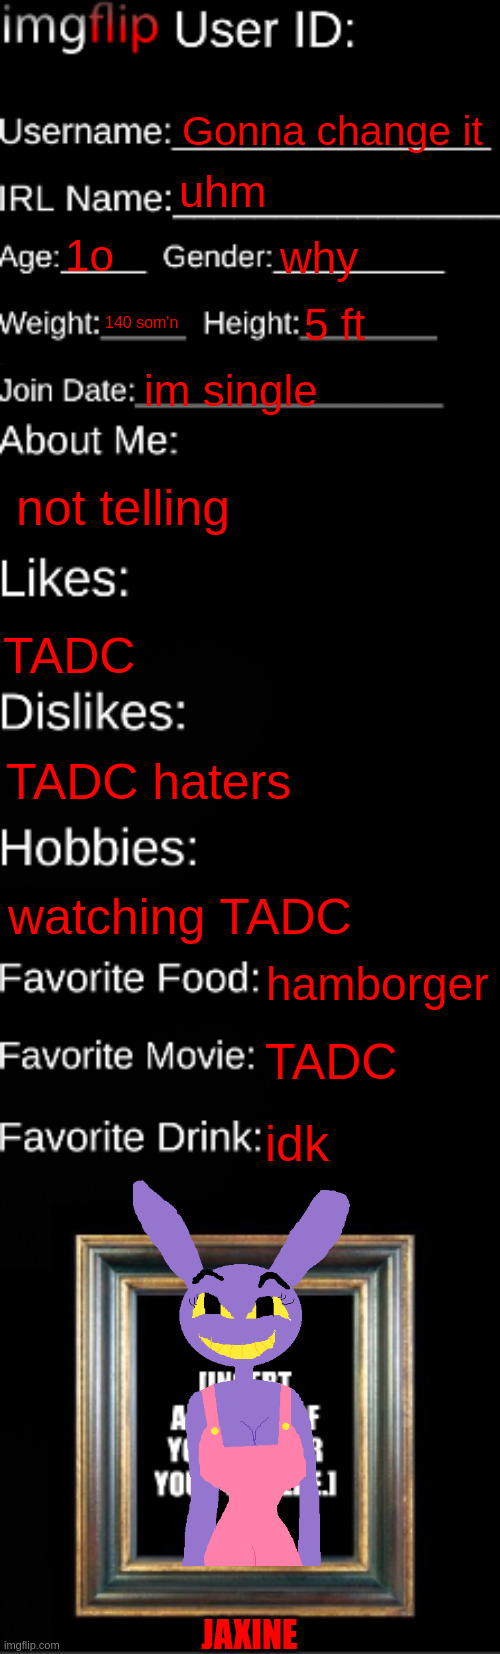 imgflip ID Card | Gonna change it; uhm; 1o; why; 140 som'n; 5 ft; im single; not telling; TADC; TADC haters; watching TADC; hamborger; TADC; idk; JAXINE | image tagged in imgflip id card | made w/ Imgflip meme maker